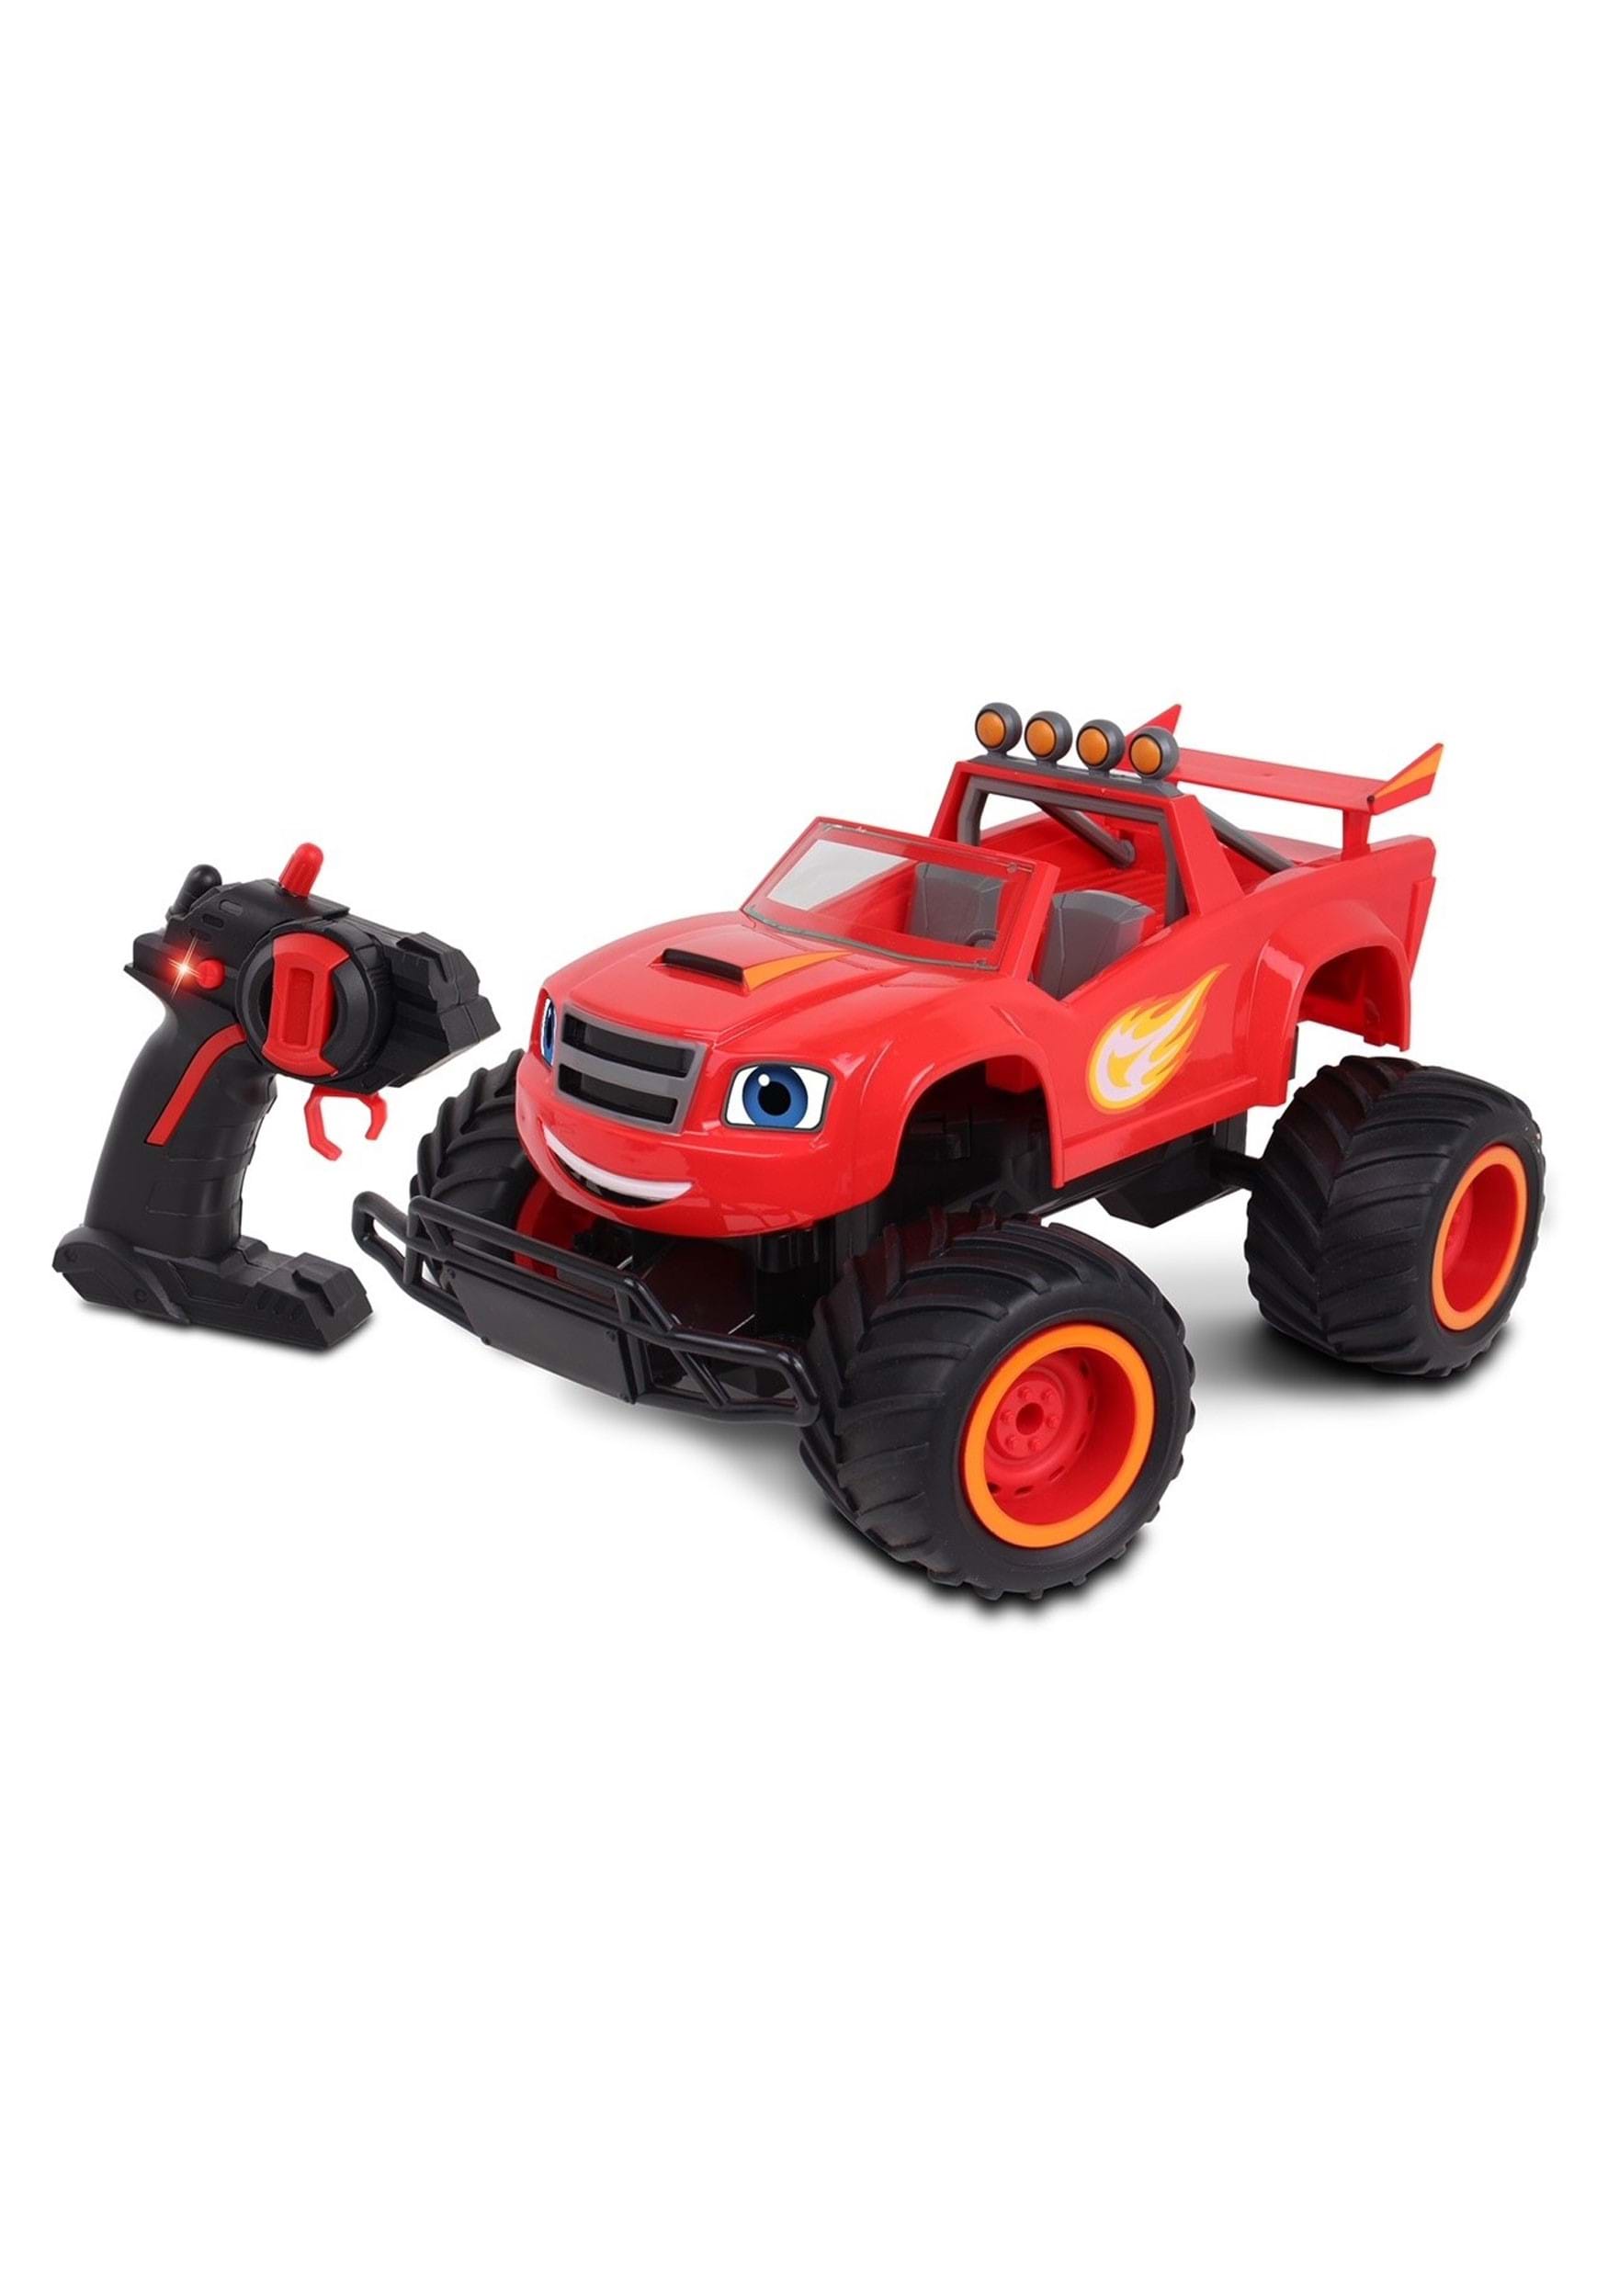 NKOK Blaze And The Monster Machines RC: High Performance Blaze -  Nickelodeon, Remote Control Offroad Monster Truck